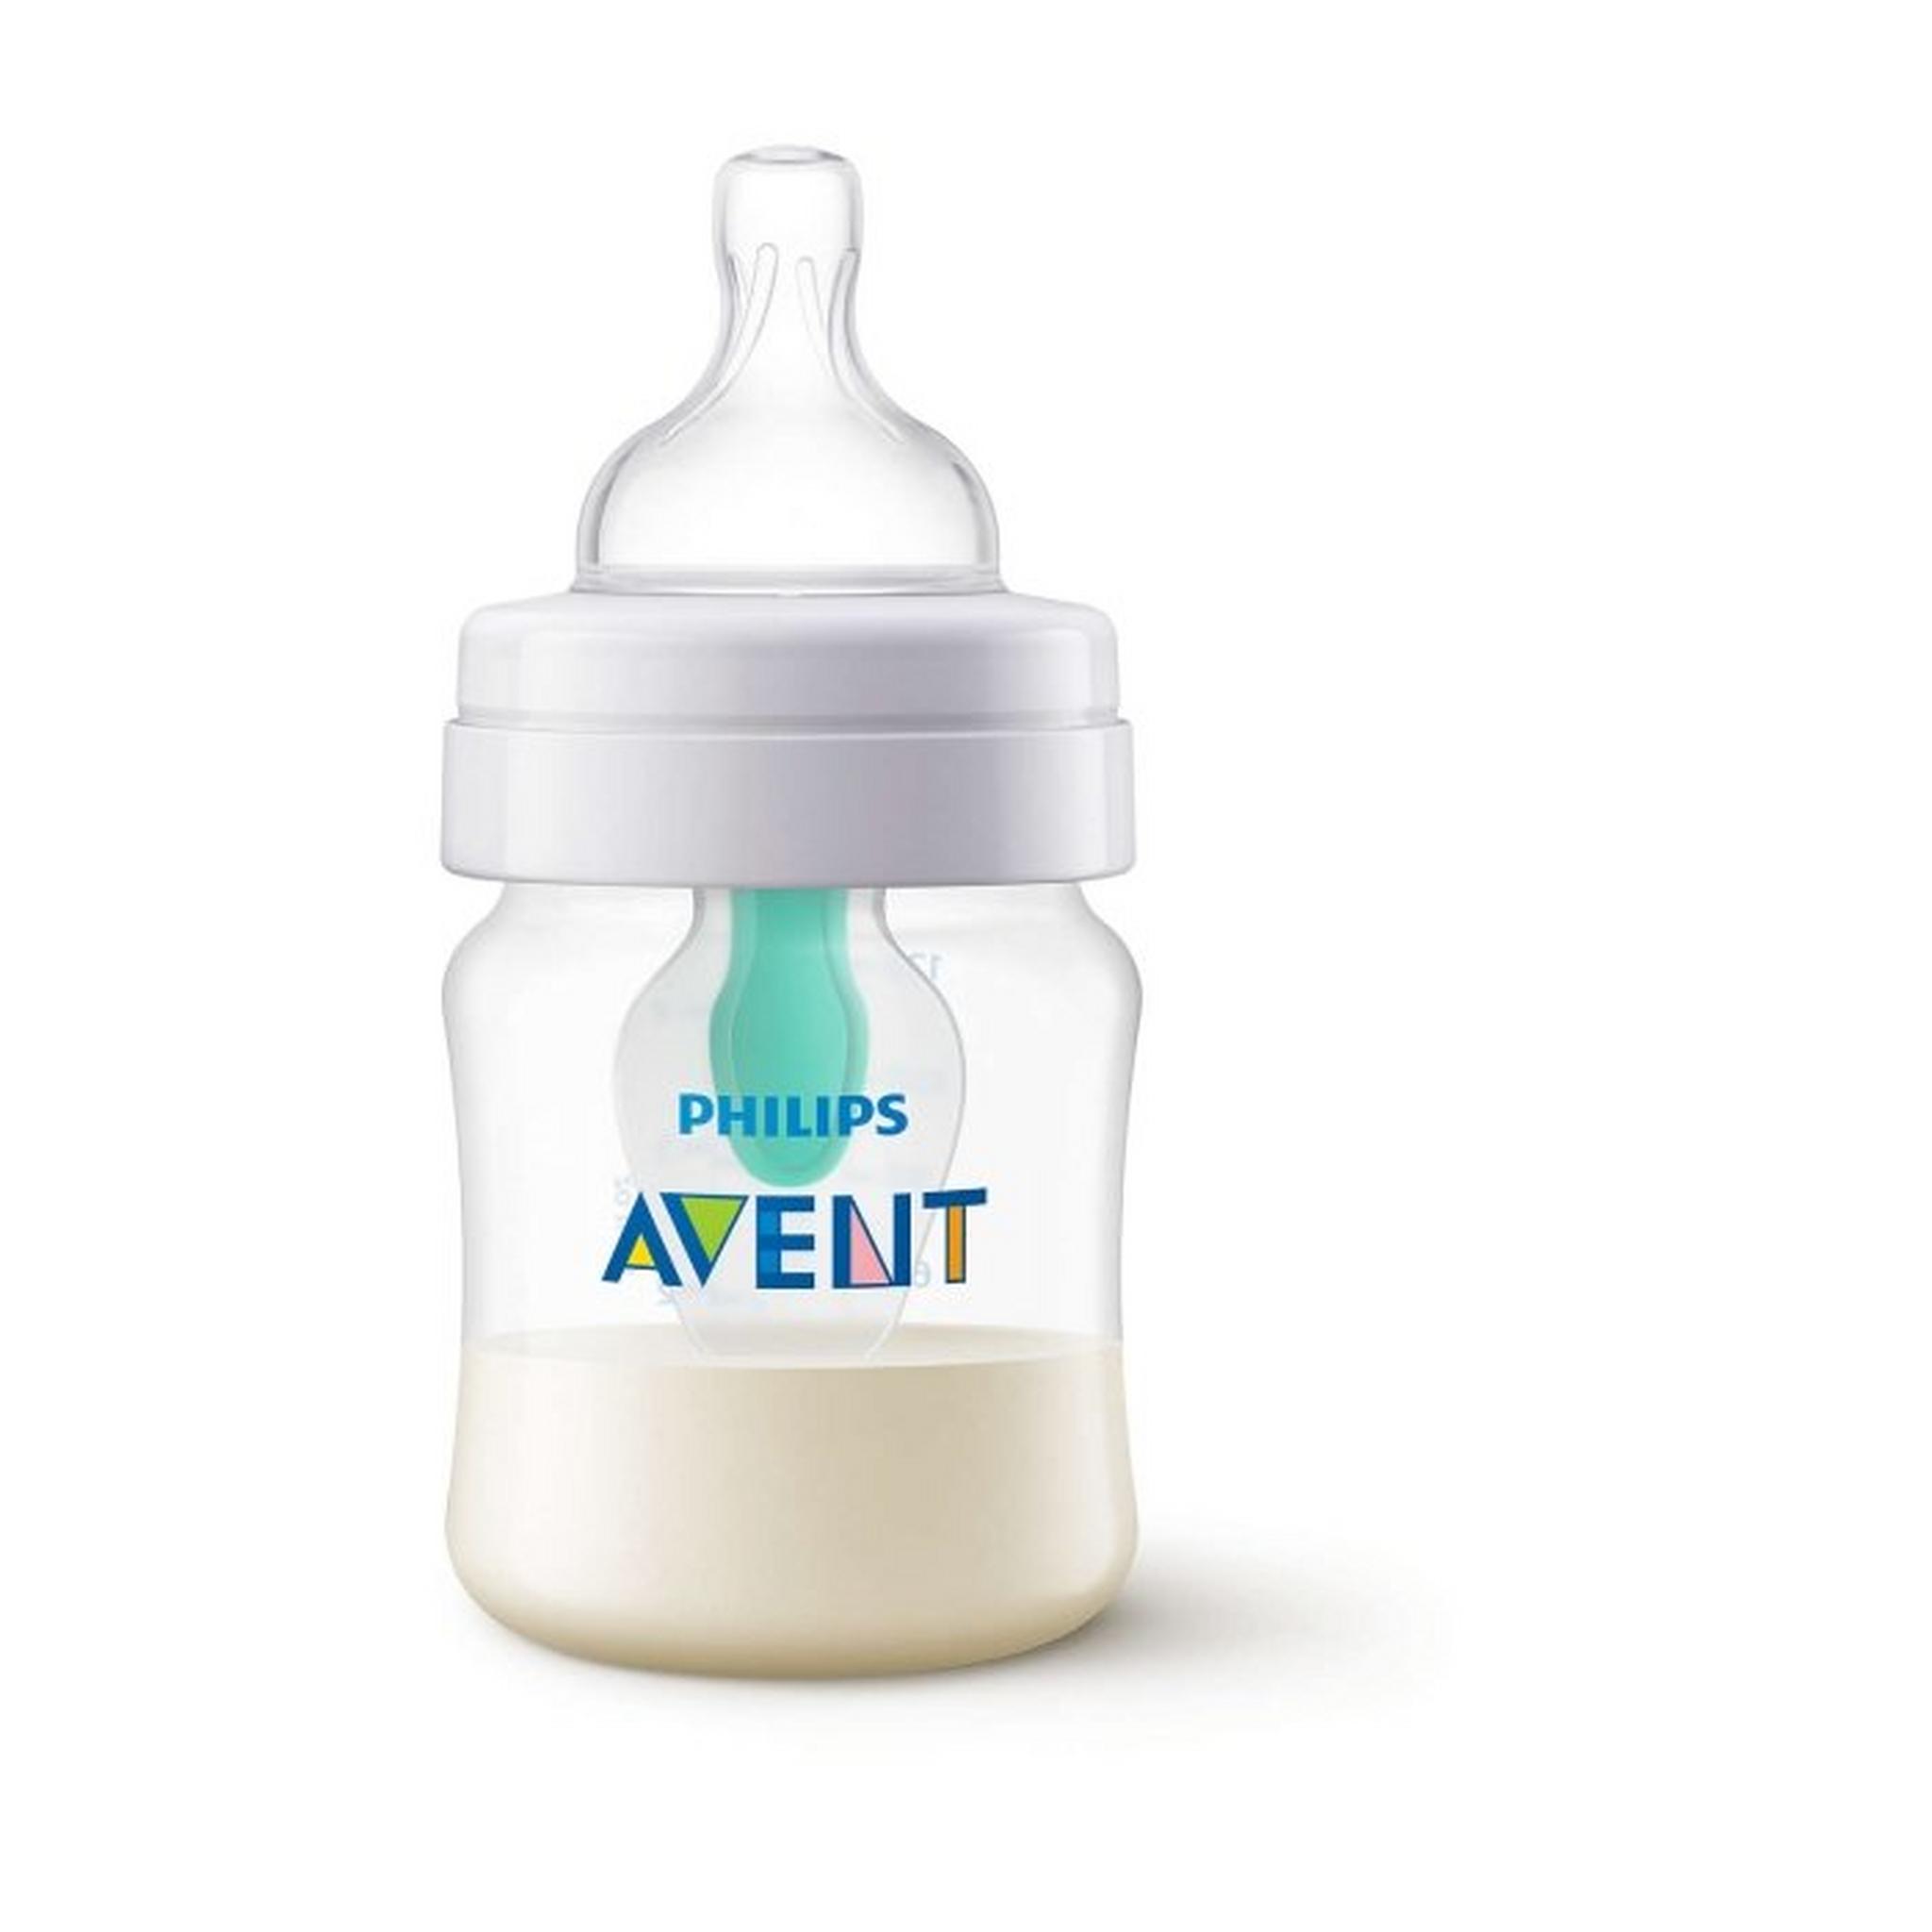 Philips Avent Anti-Colic Starter Set With Airfree Vent Feeding Bottle